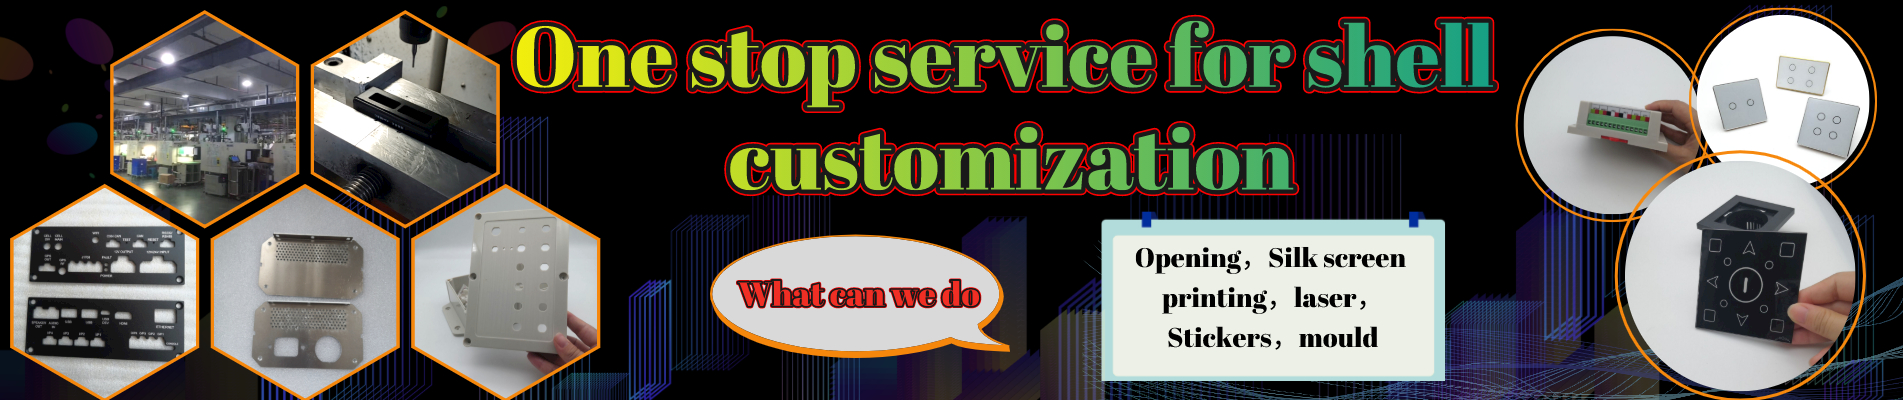 one stop service for shell customization